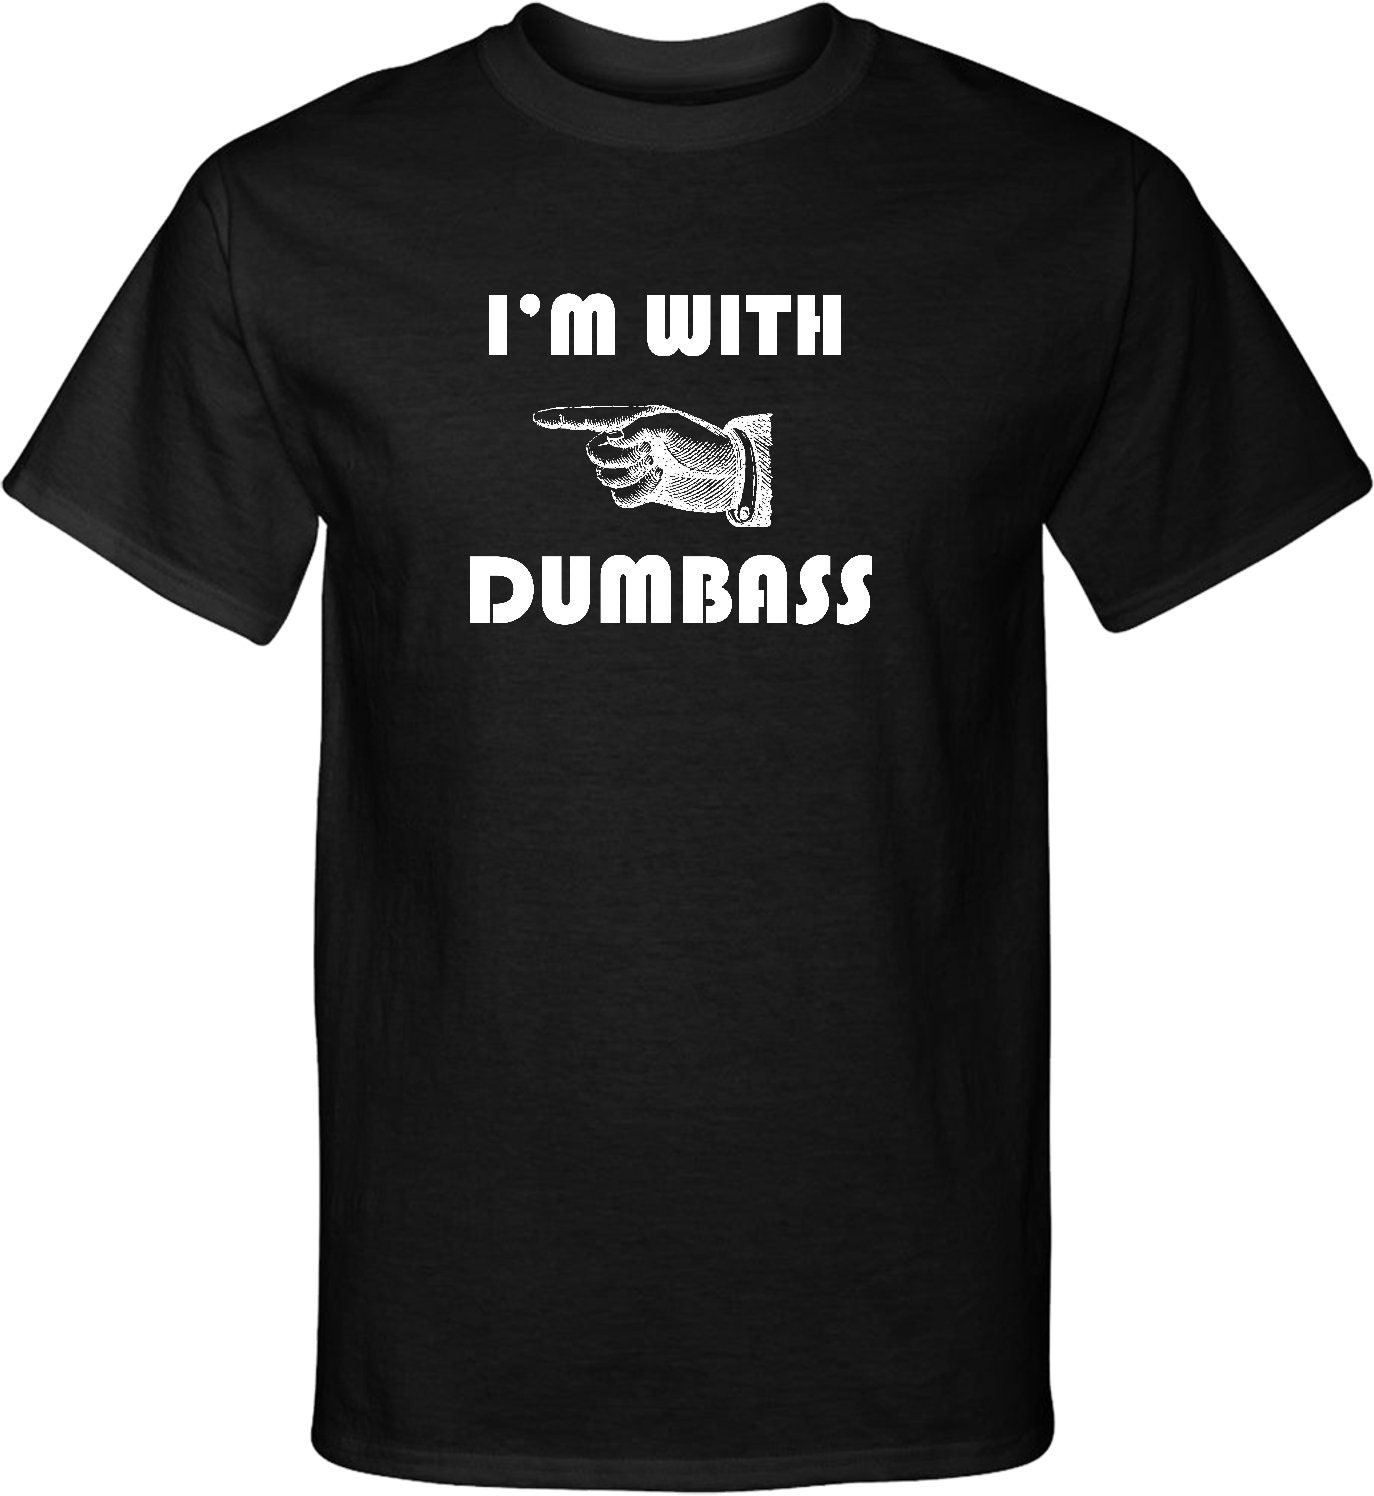 I'm With Dumbass Tall Tee T-Shirt DUMBASS-PC61T | Etsy